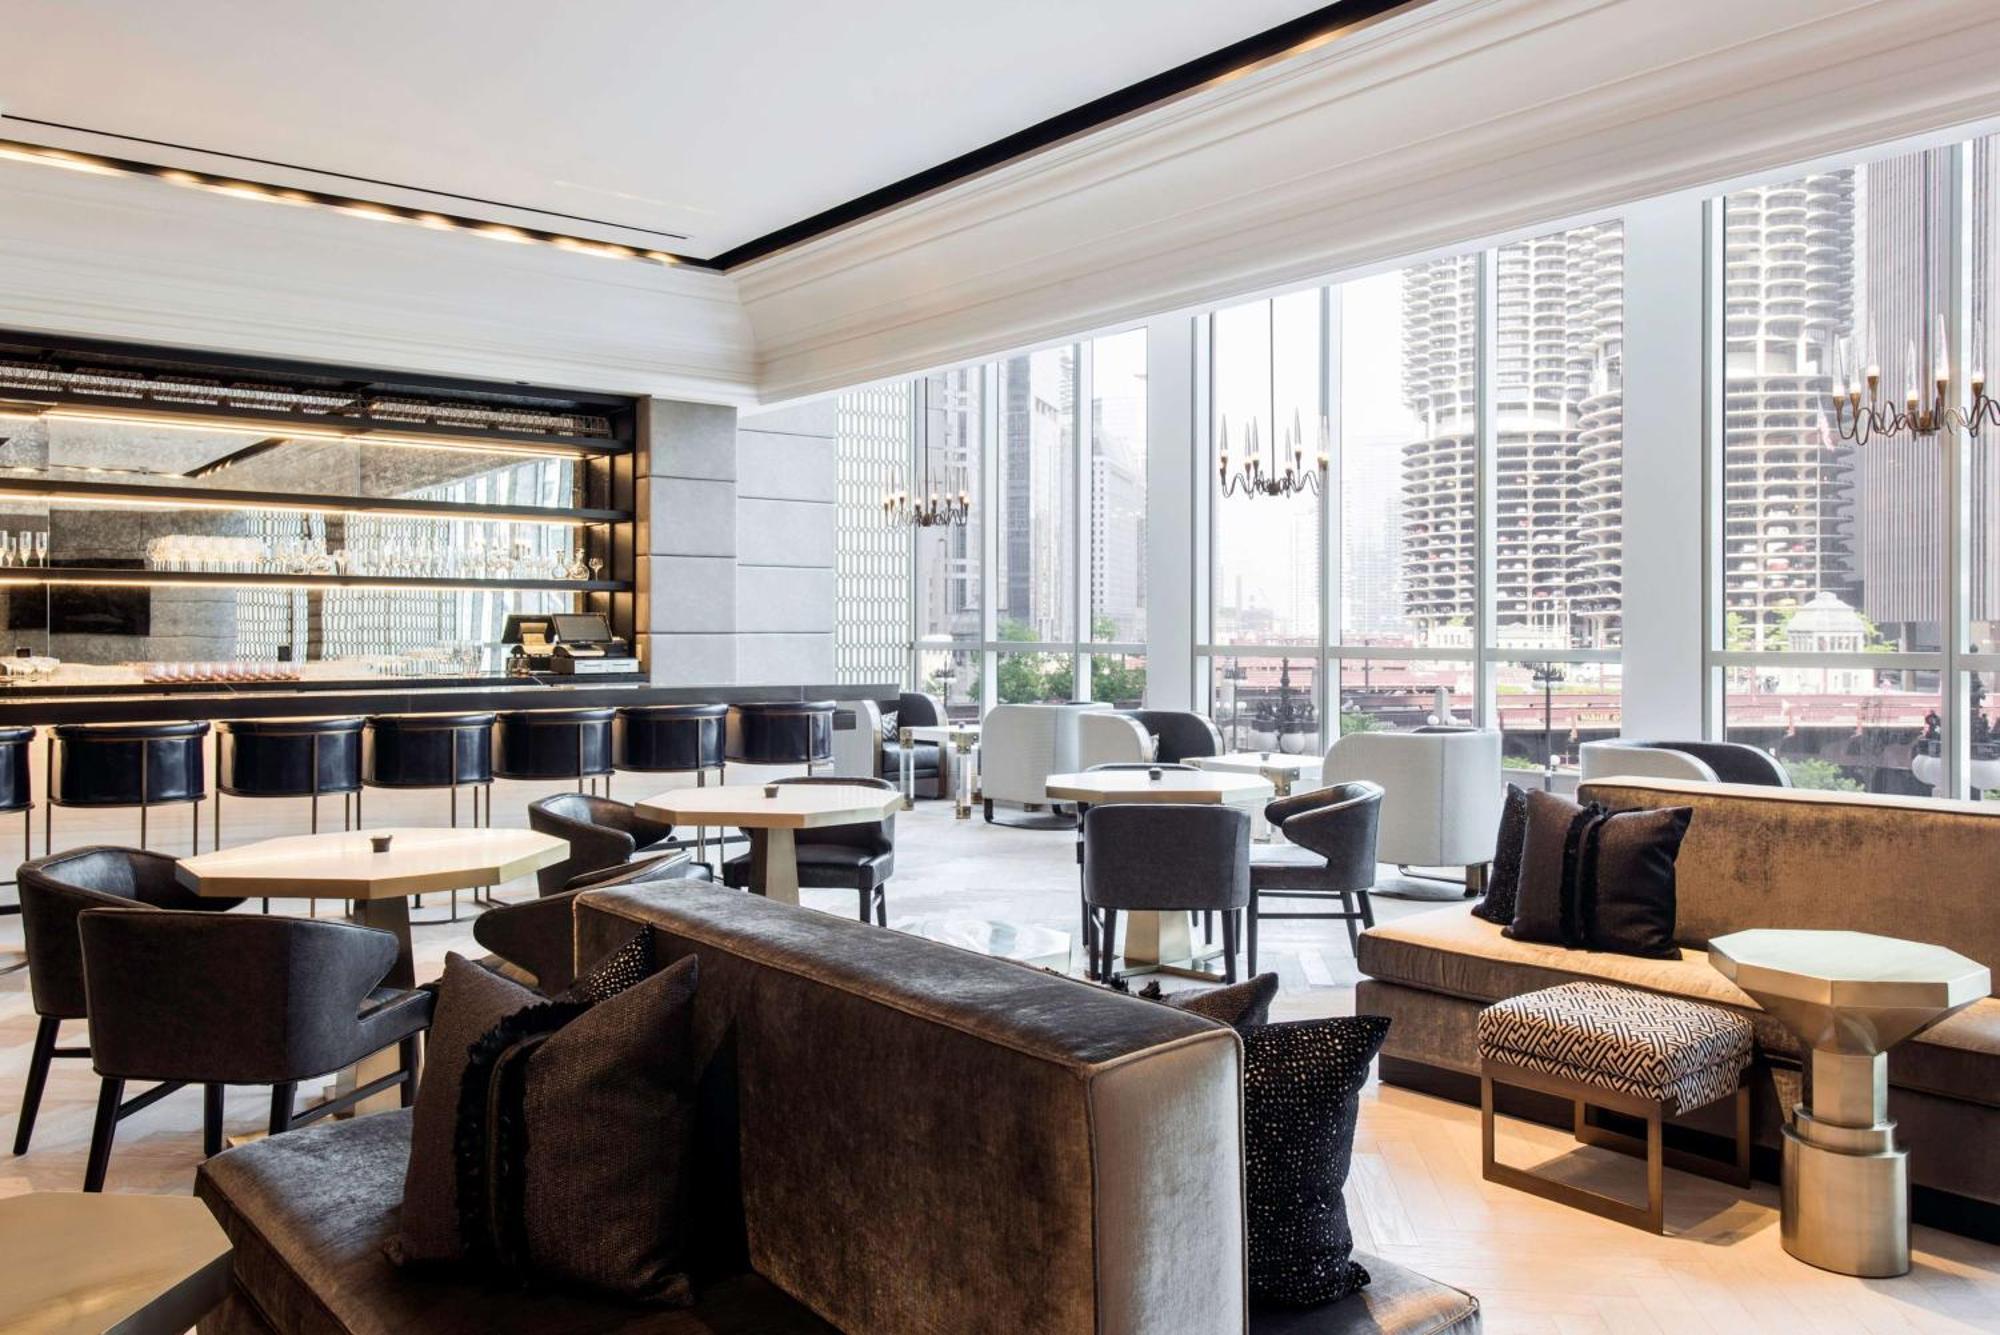 Londonhouse Chicago, Curio Collection By Hilton Hotel Buitenkant foto